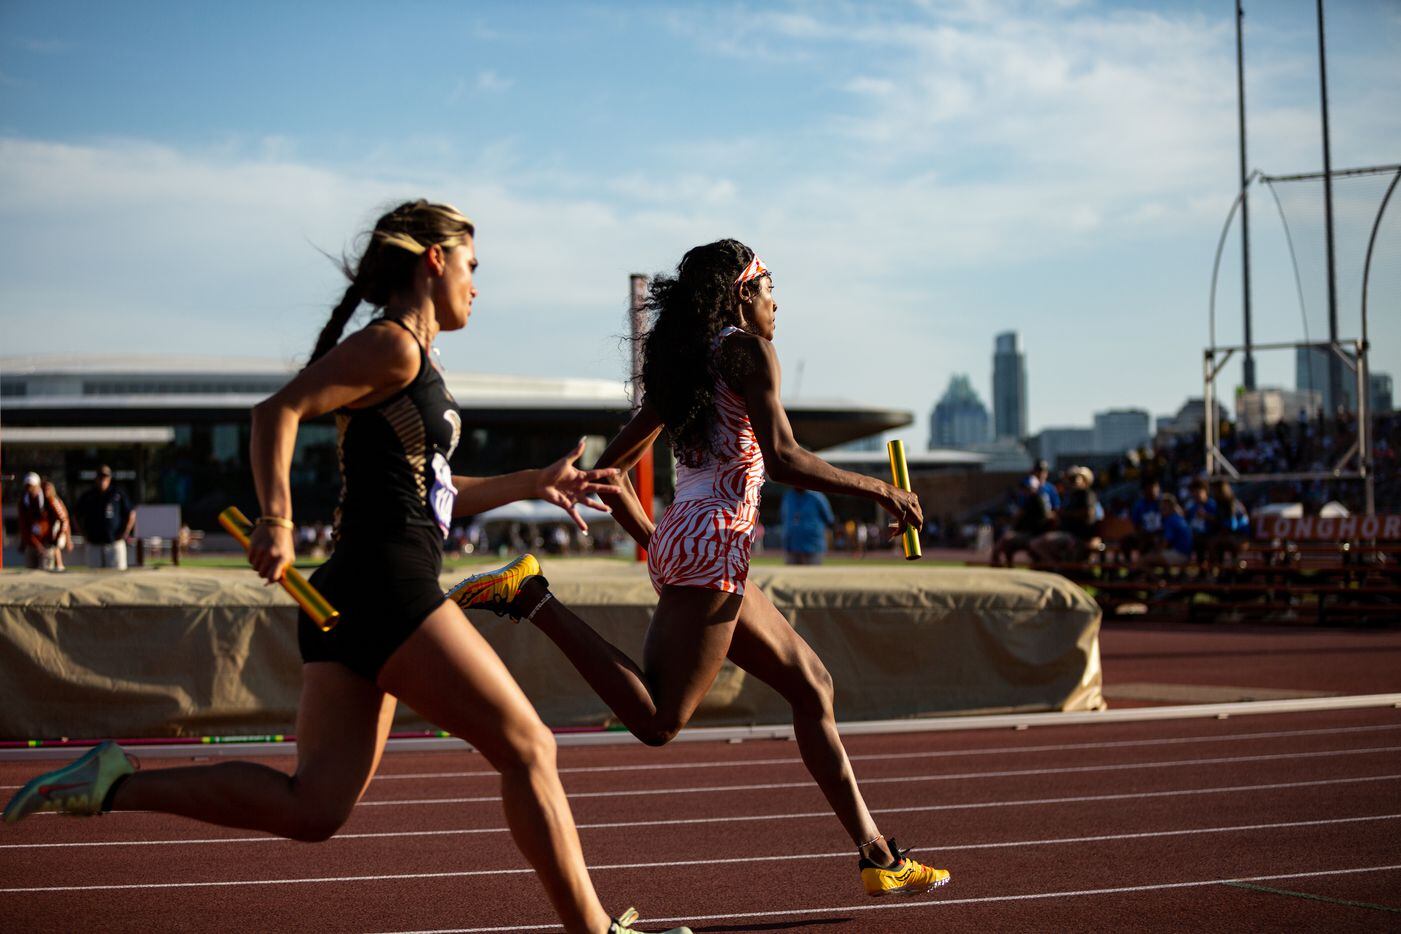 Lancaster’s Trelondra Strong, right, runs in the girls’ 4x200 relay final at the UIL Track &...